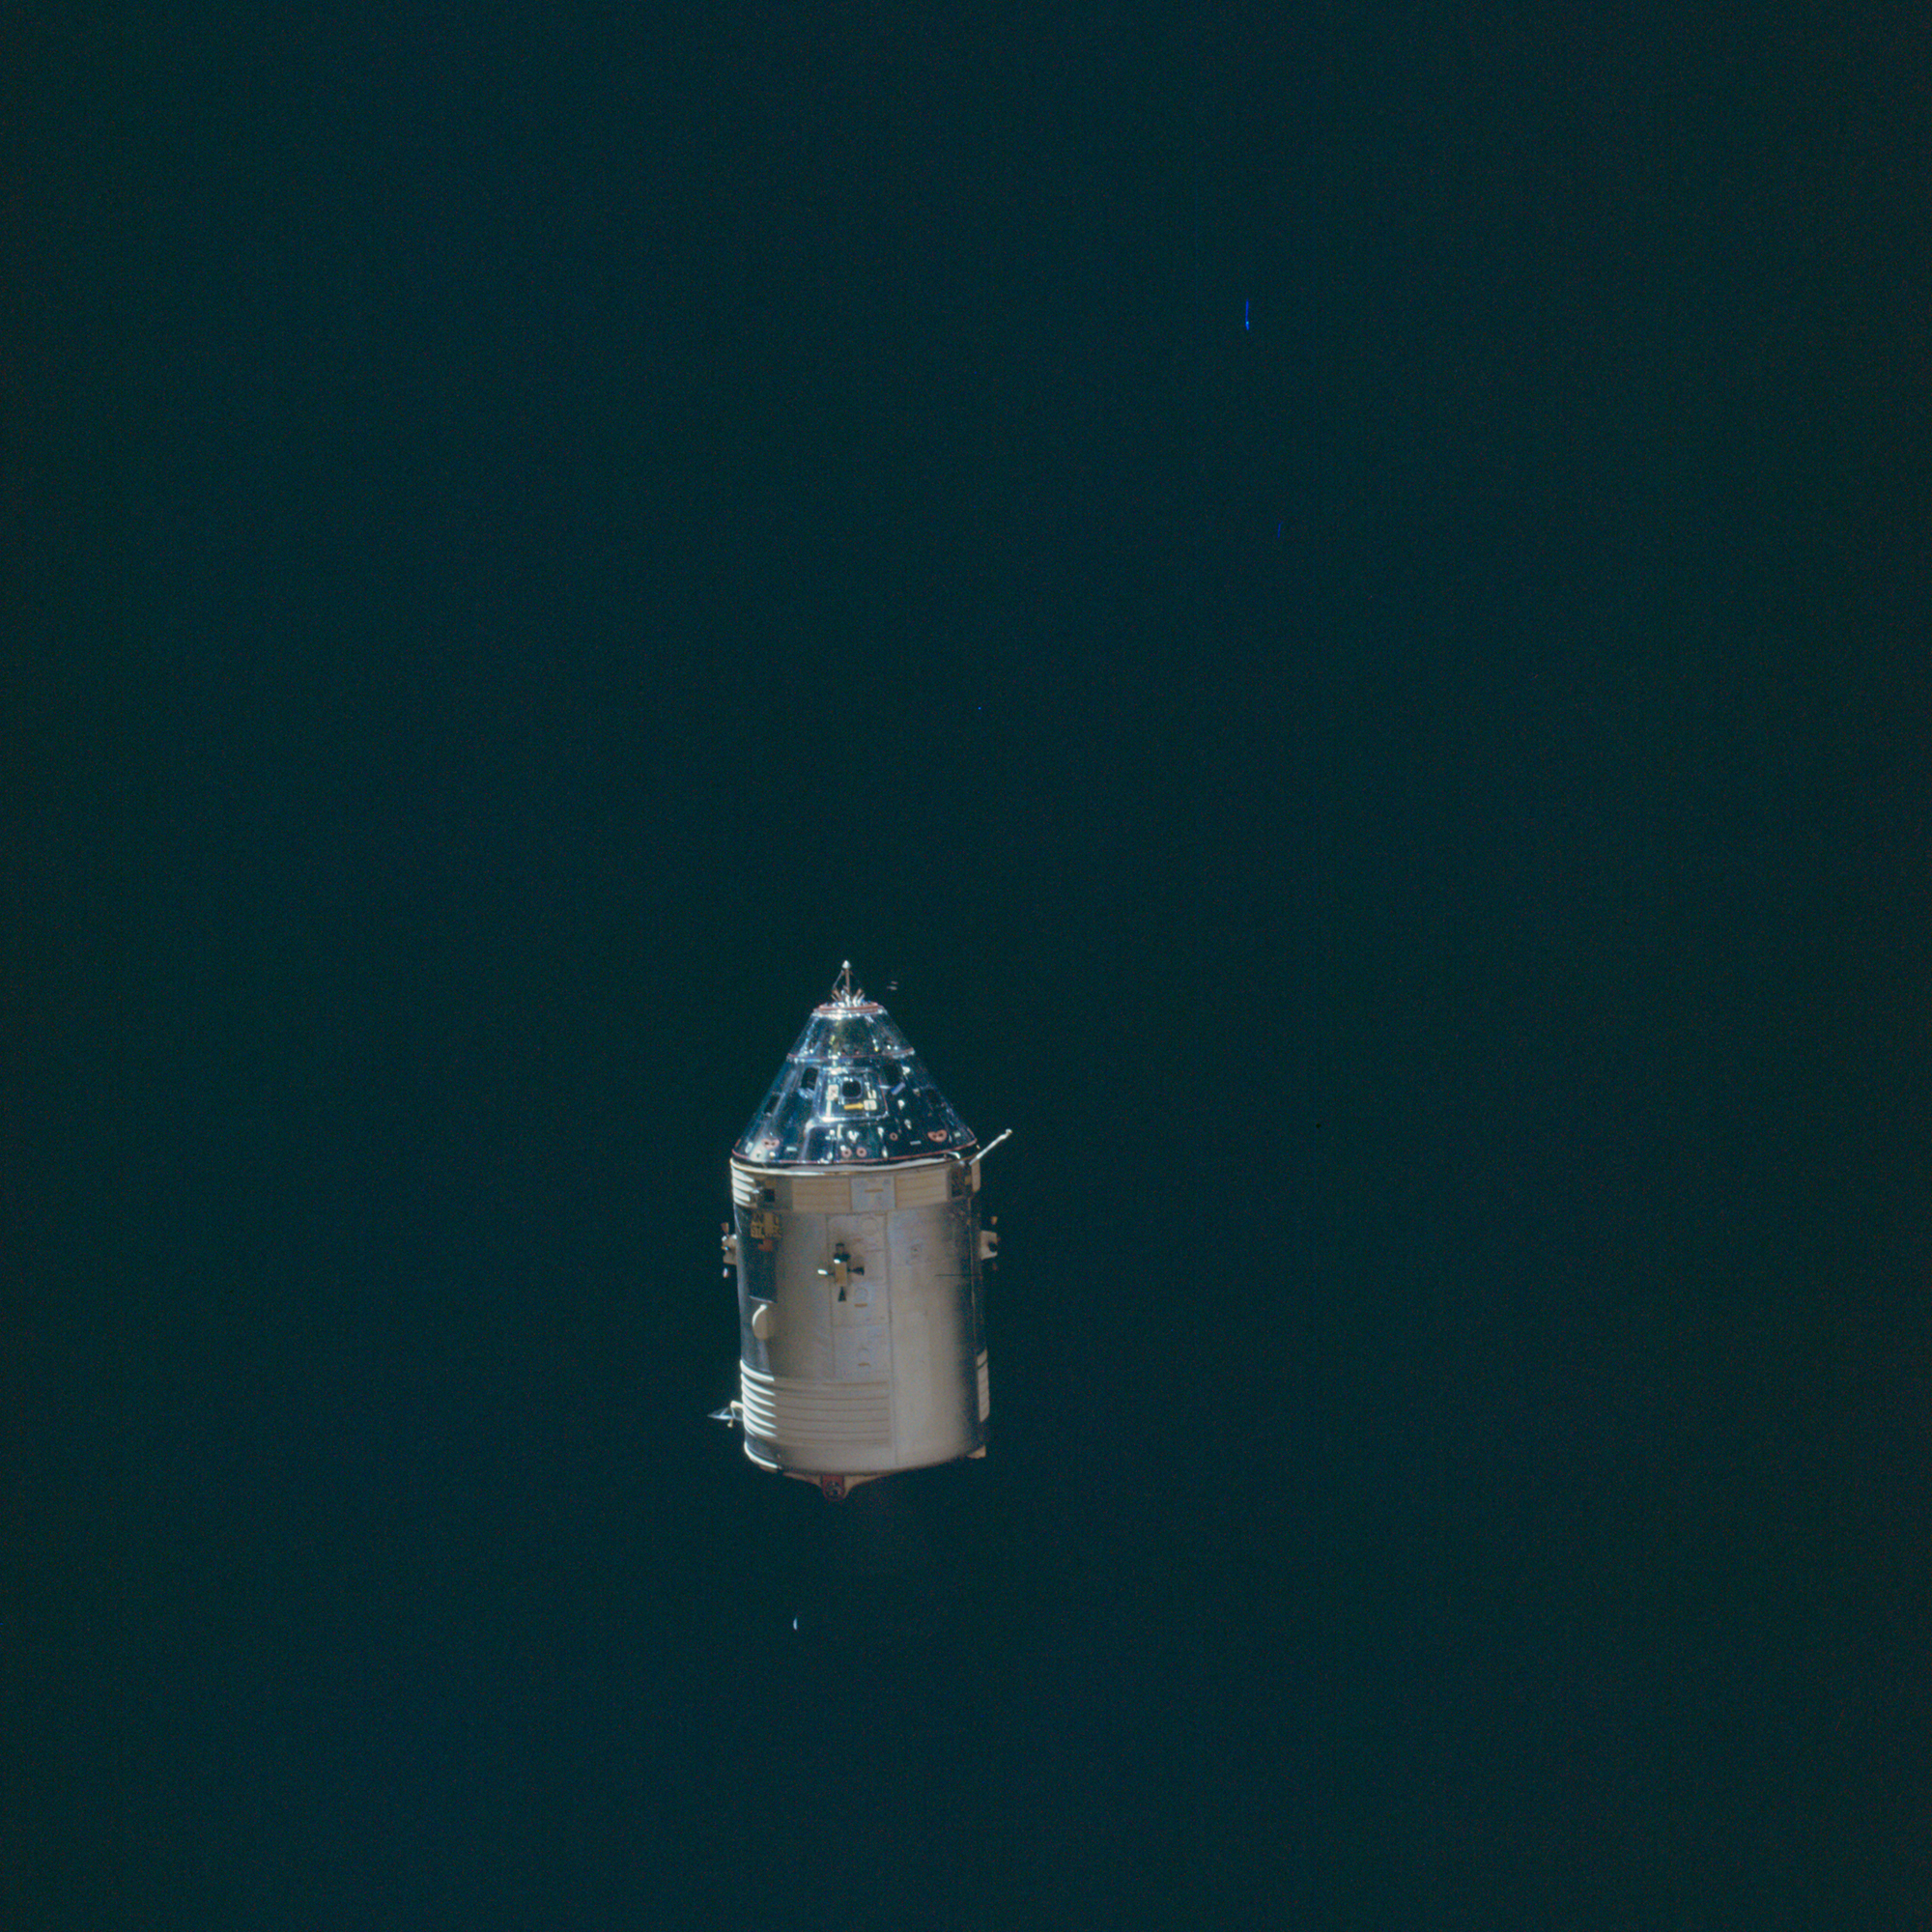 apollo-14-view-of-the-comman-service-module-from-the-lunar-module-during-rendezvous-2.jpg